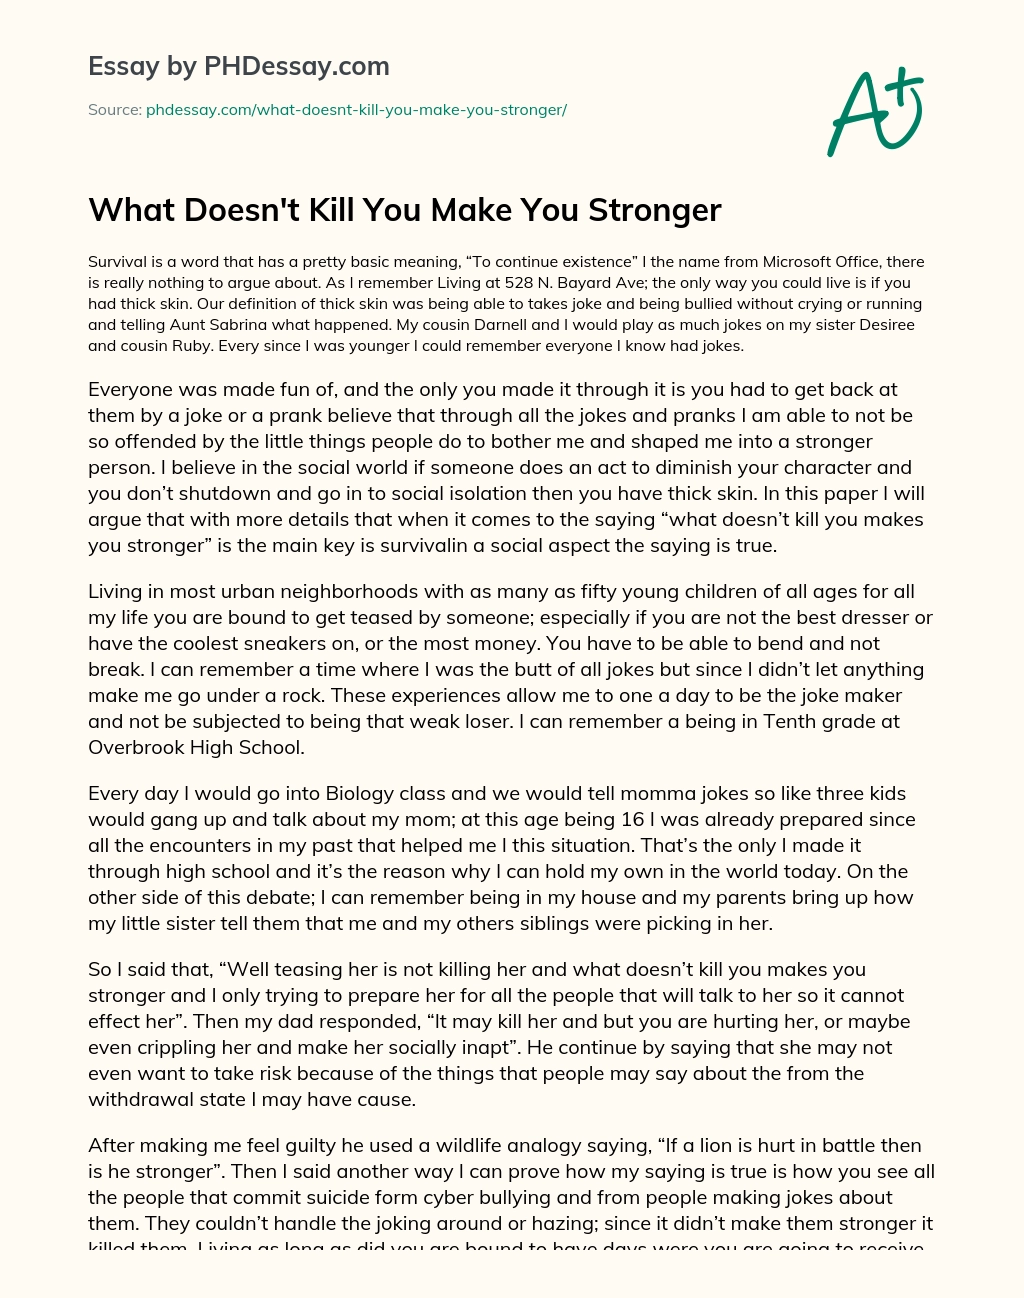 What Doesn’t Kill You Make You Stronger essay